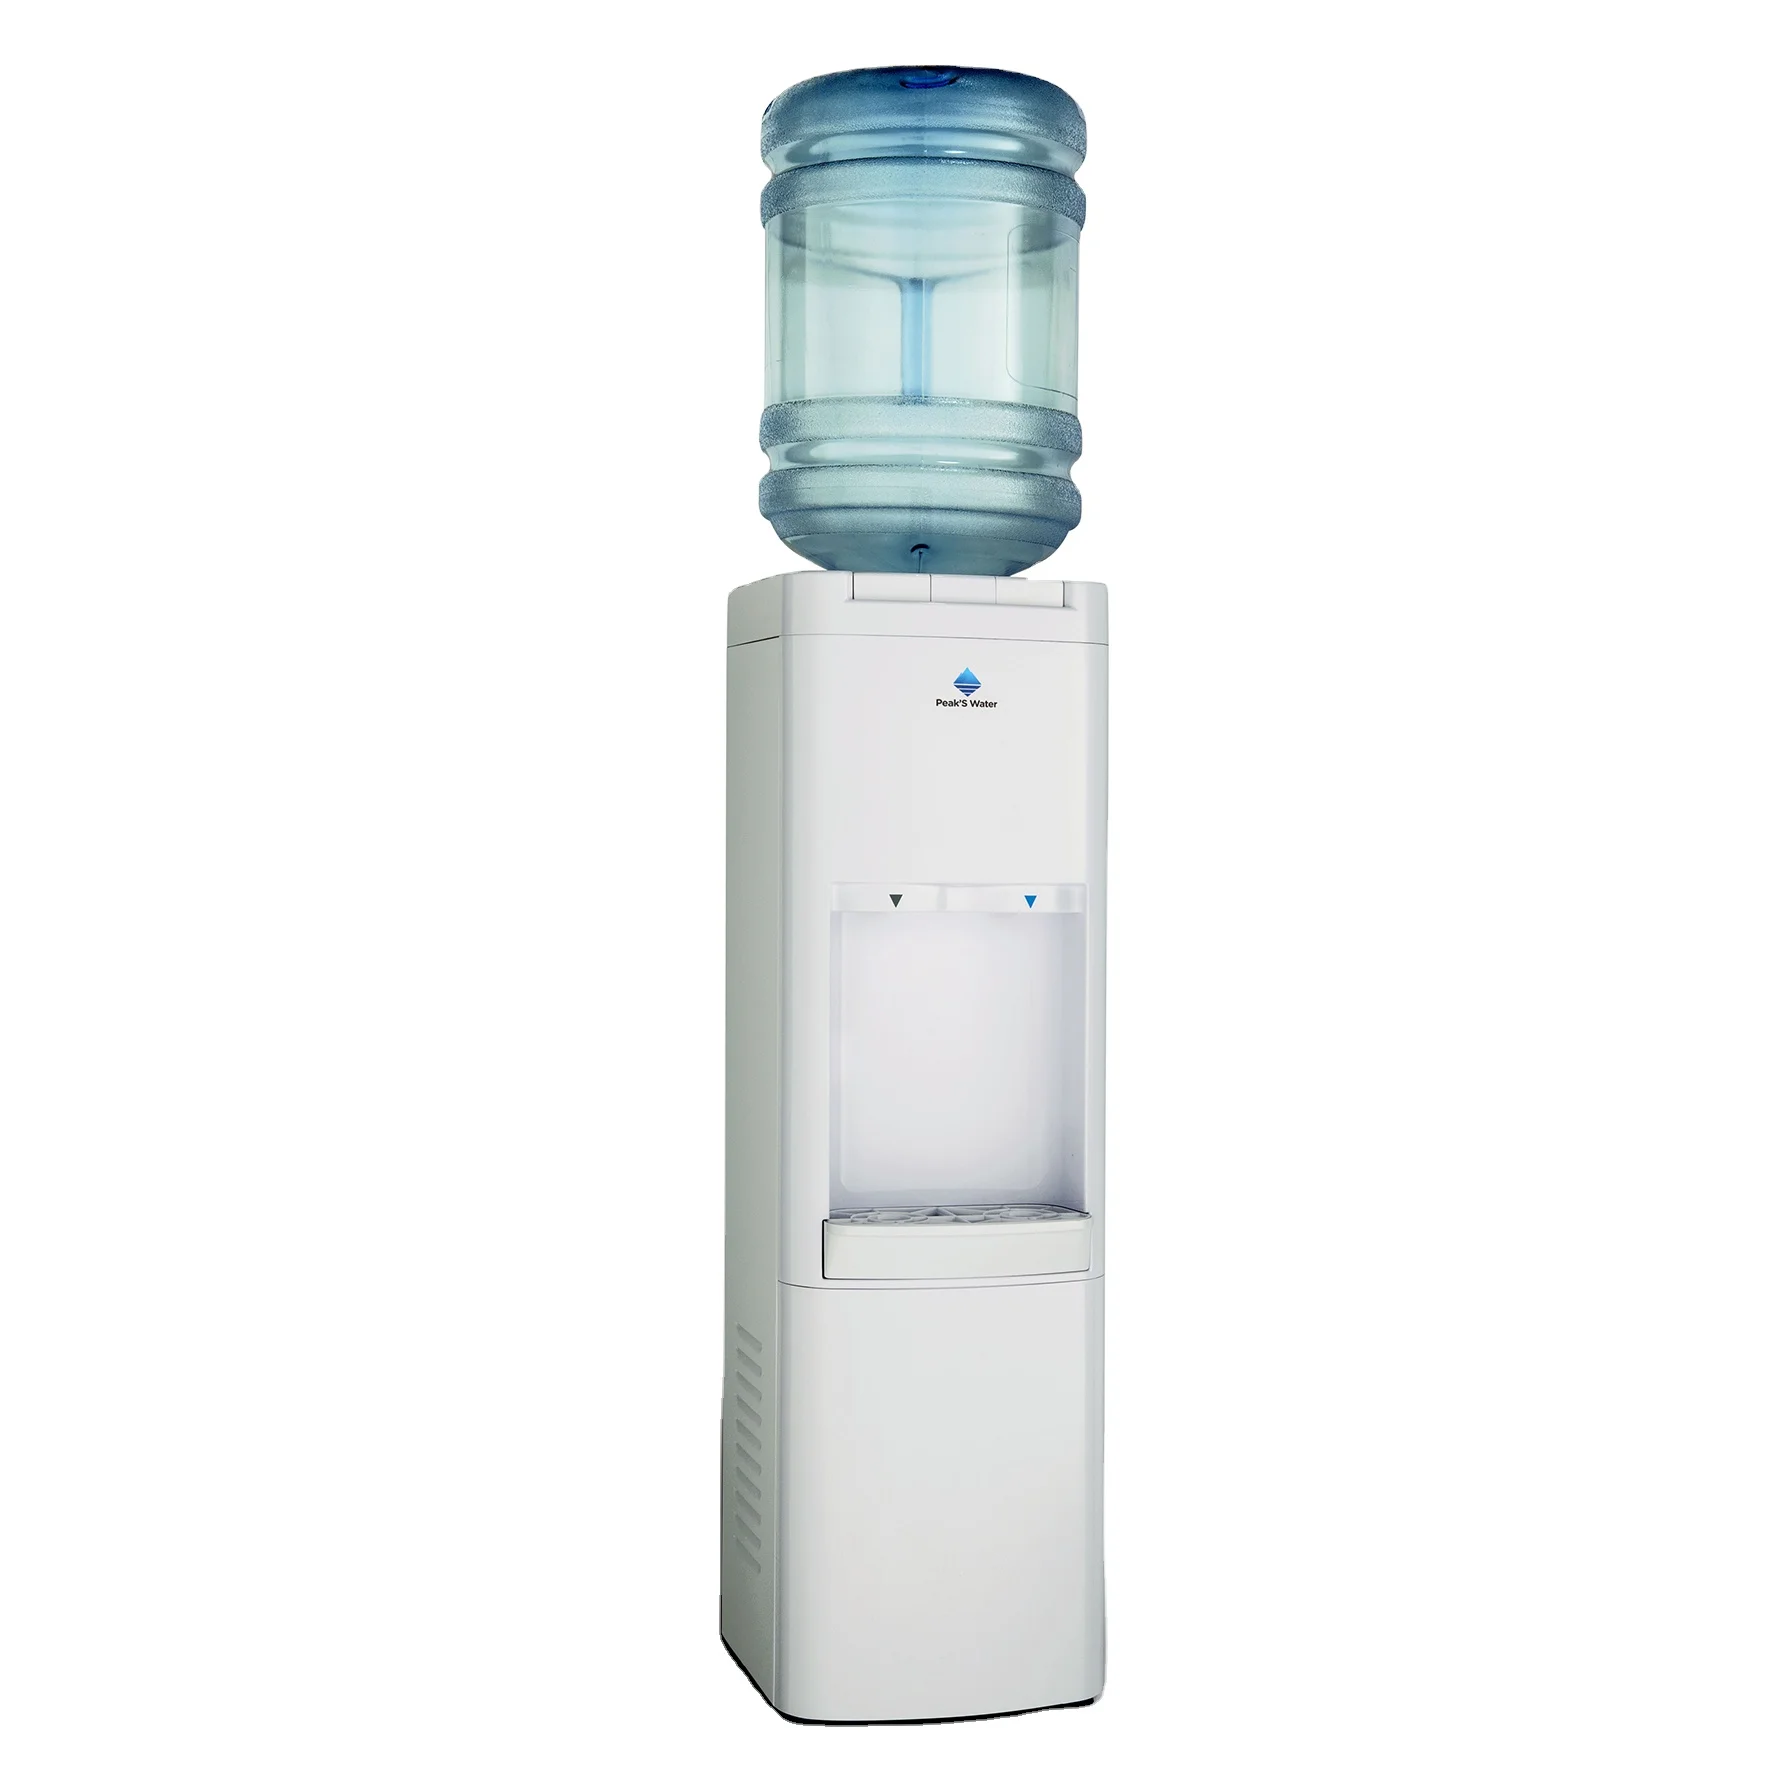 

Floor Stand Water Dispenser Top Loading White 3 Or 5 Gallon Electric Plastic Compressor Hot & Cold ABS Plastic Front 120 625